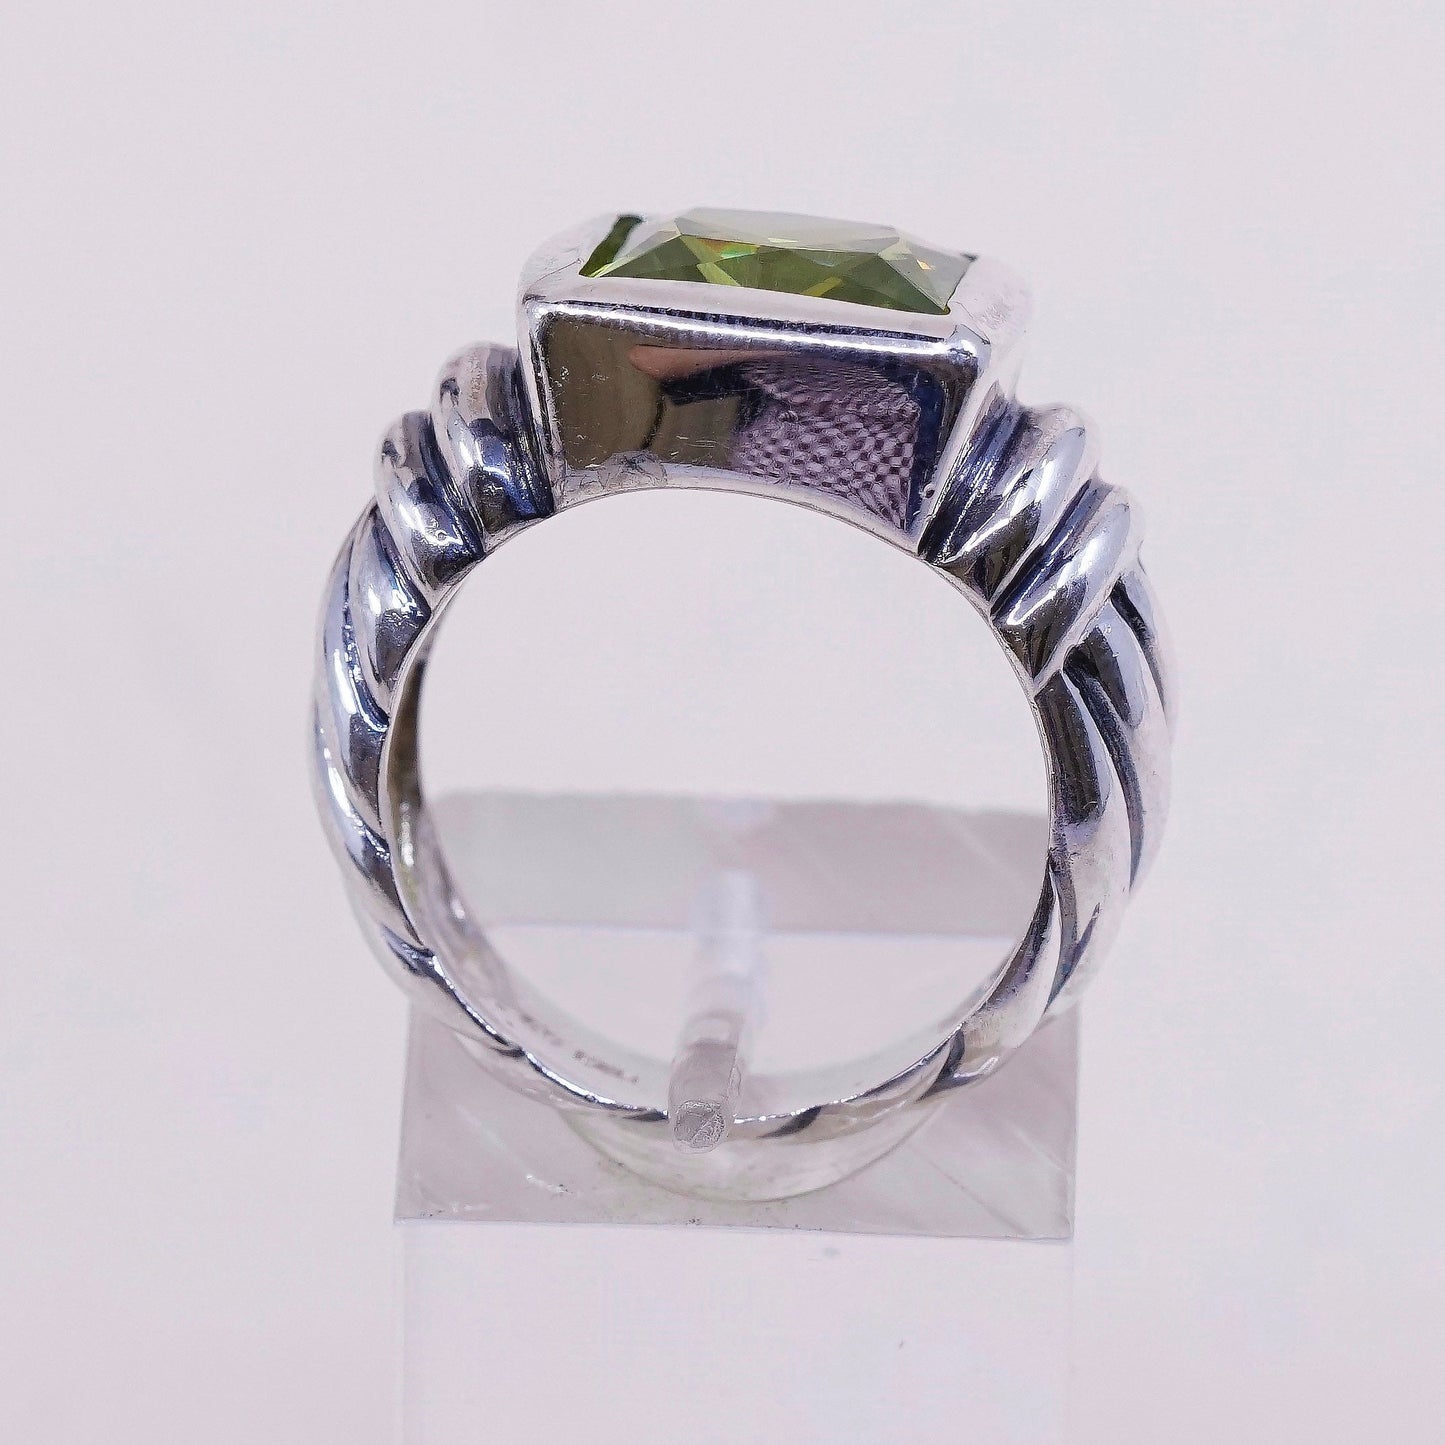 sz 7, vtg sterling 925 silver handmade statement ring with peridot